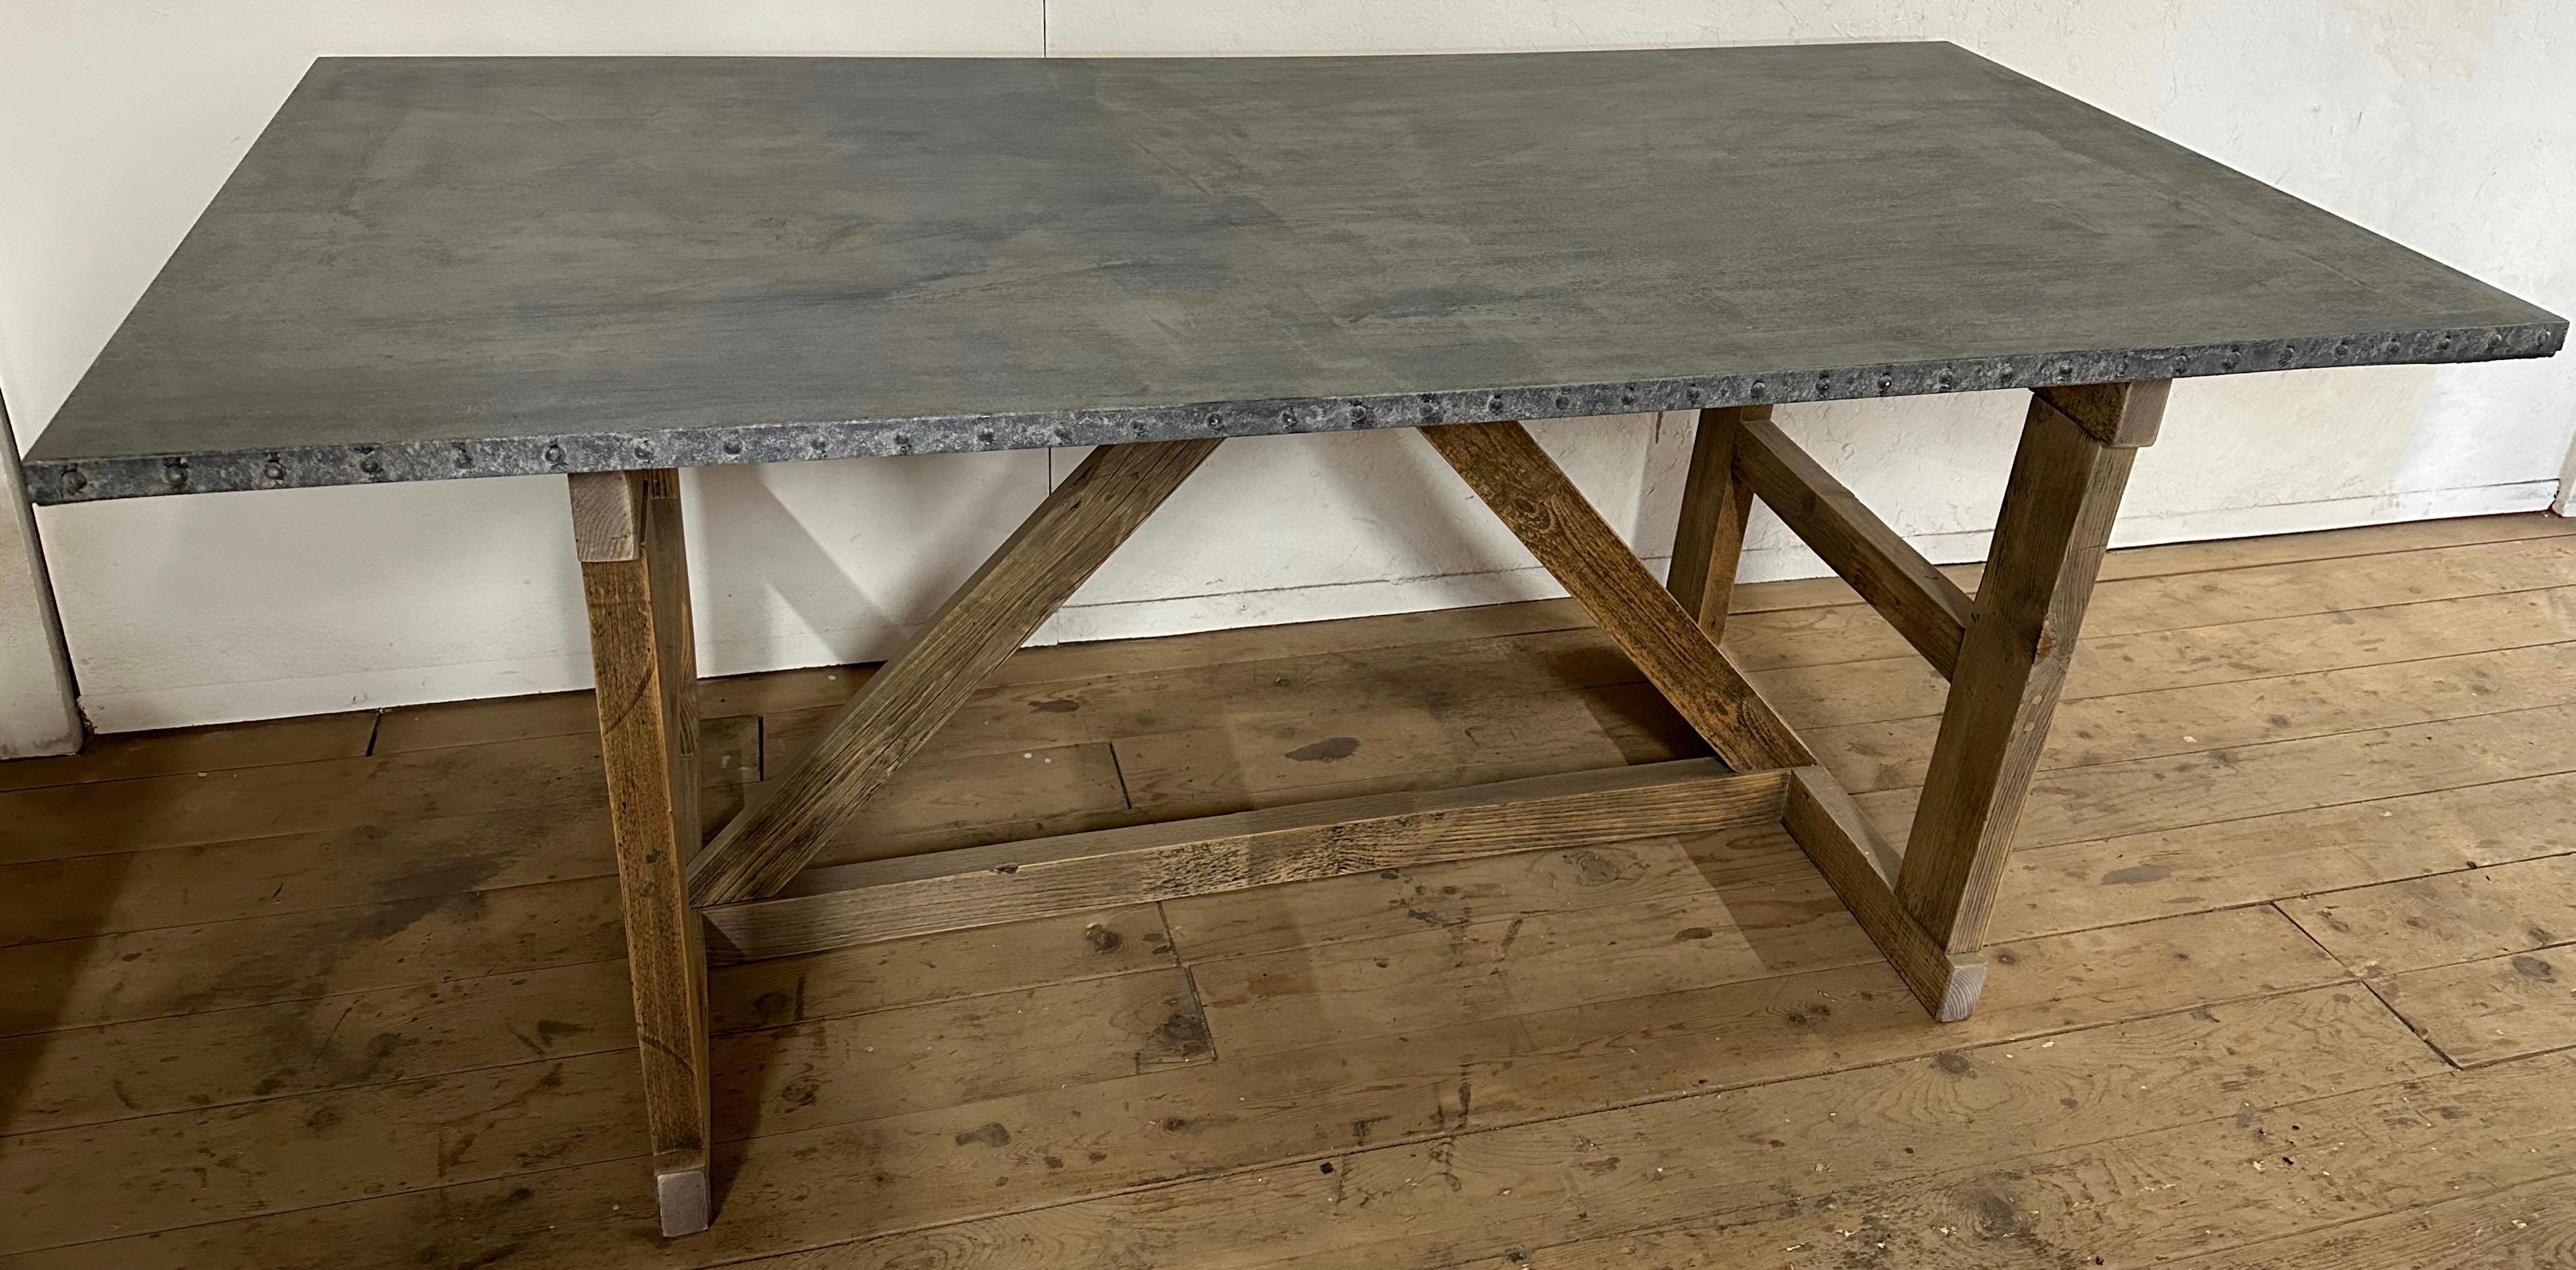 This vintage French style zinc top farm style dining, kitchen or garden table sits on an industrial style trestle base. The aged oak trestle base and the well oxidized top gives this farm table a great patina and lots of character and style. The top